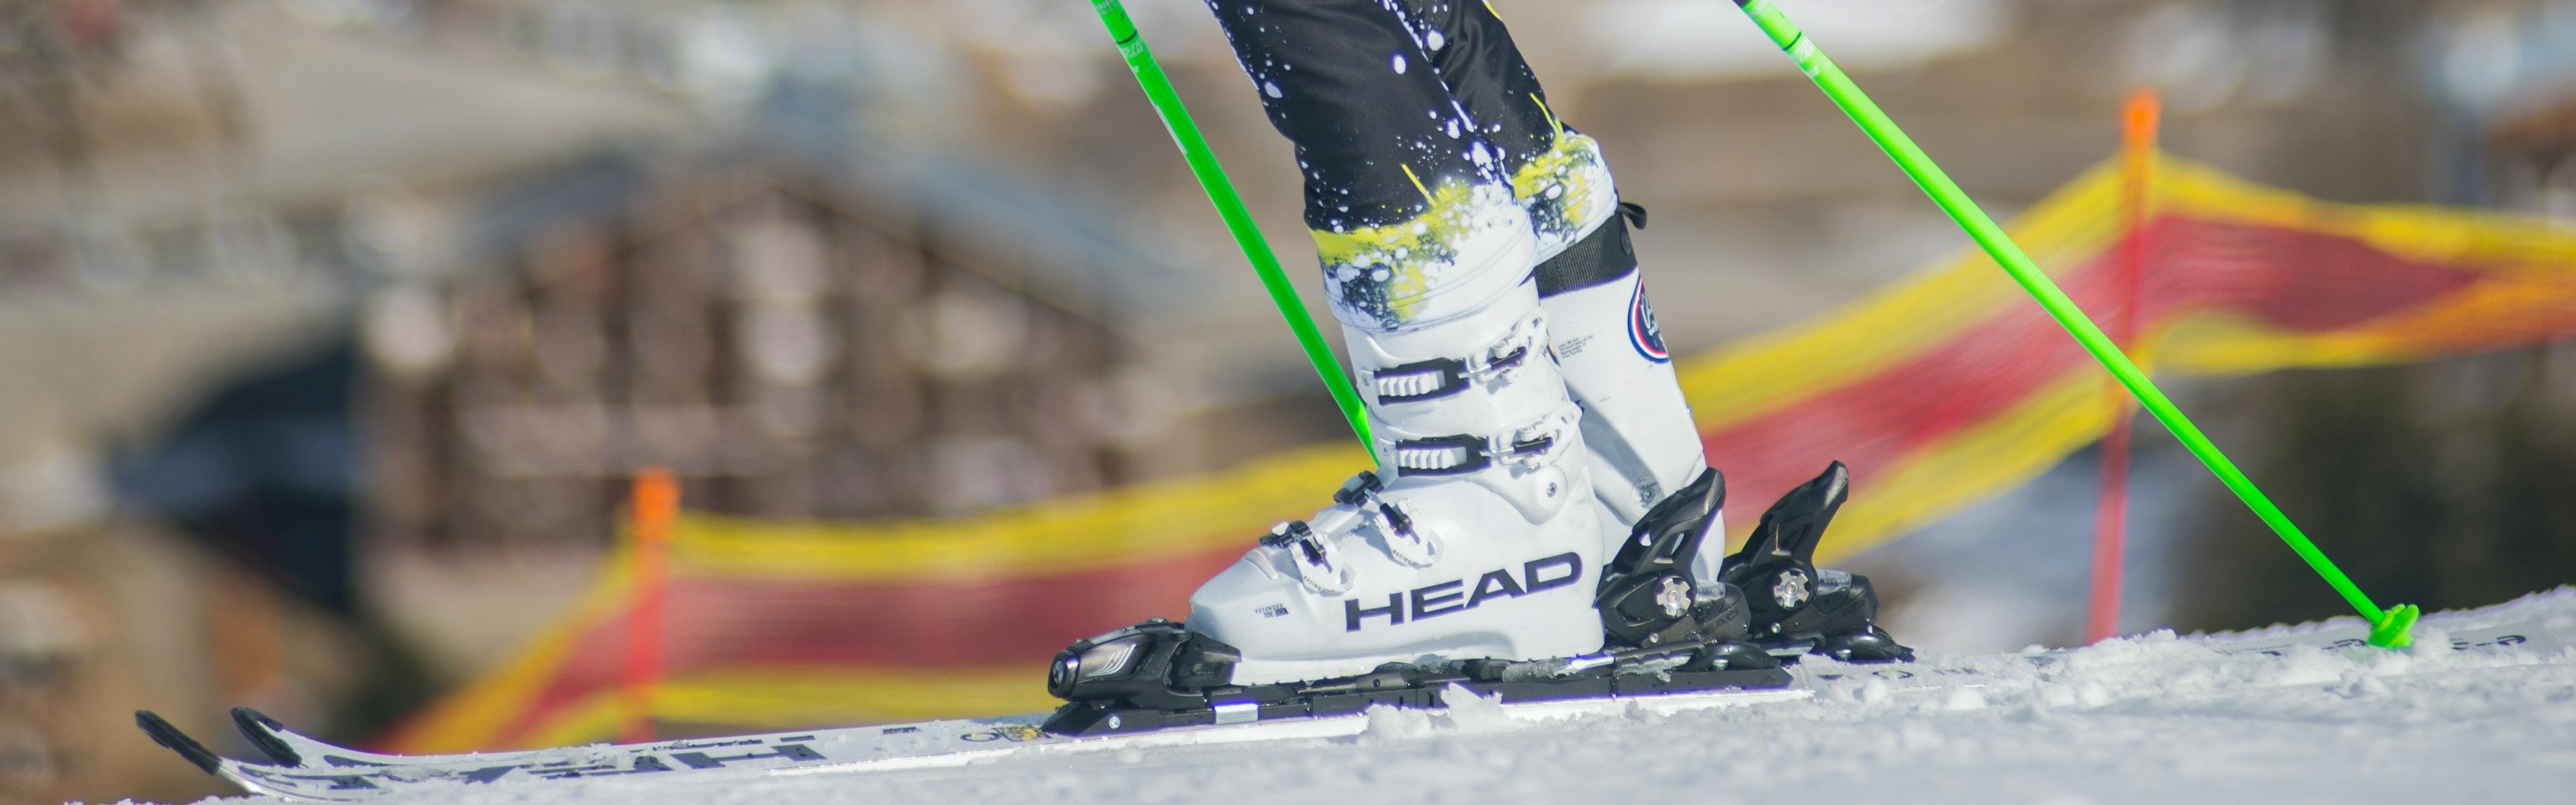 Ski Boots: How to Choose the Best Ski Boots for You